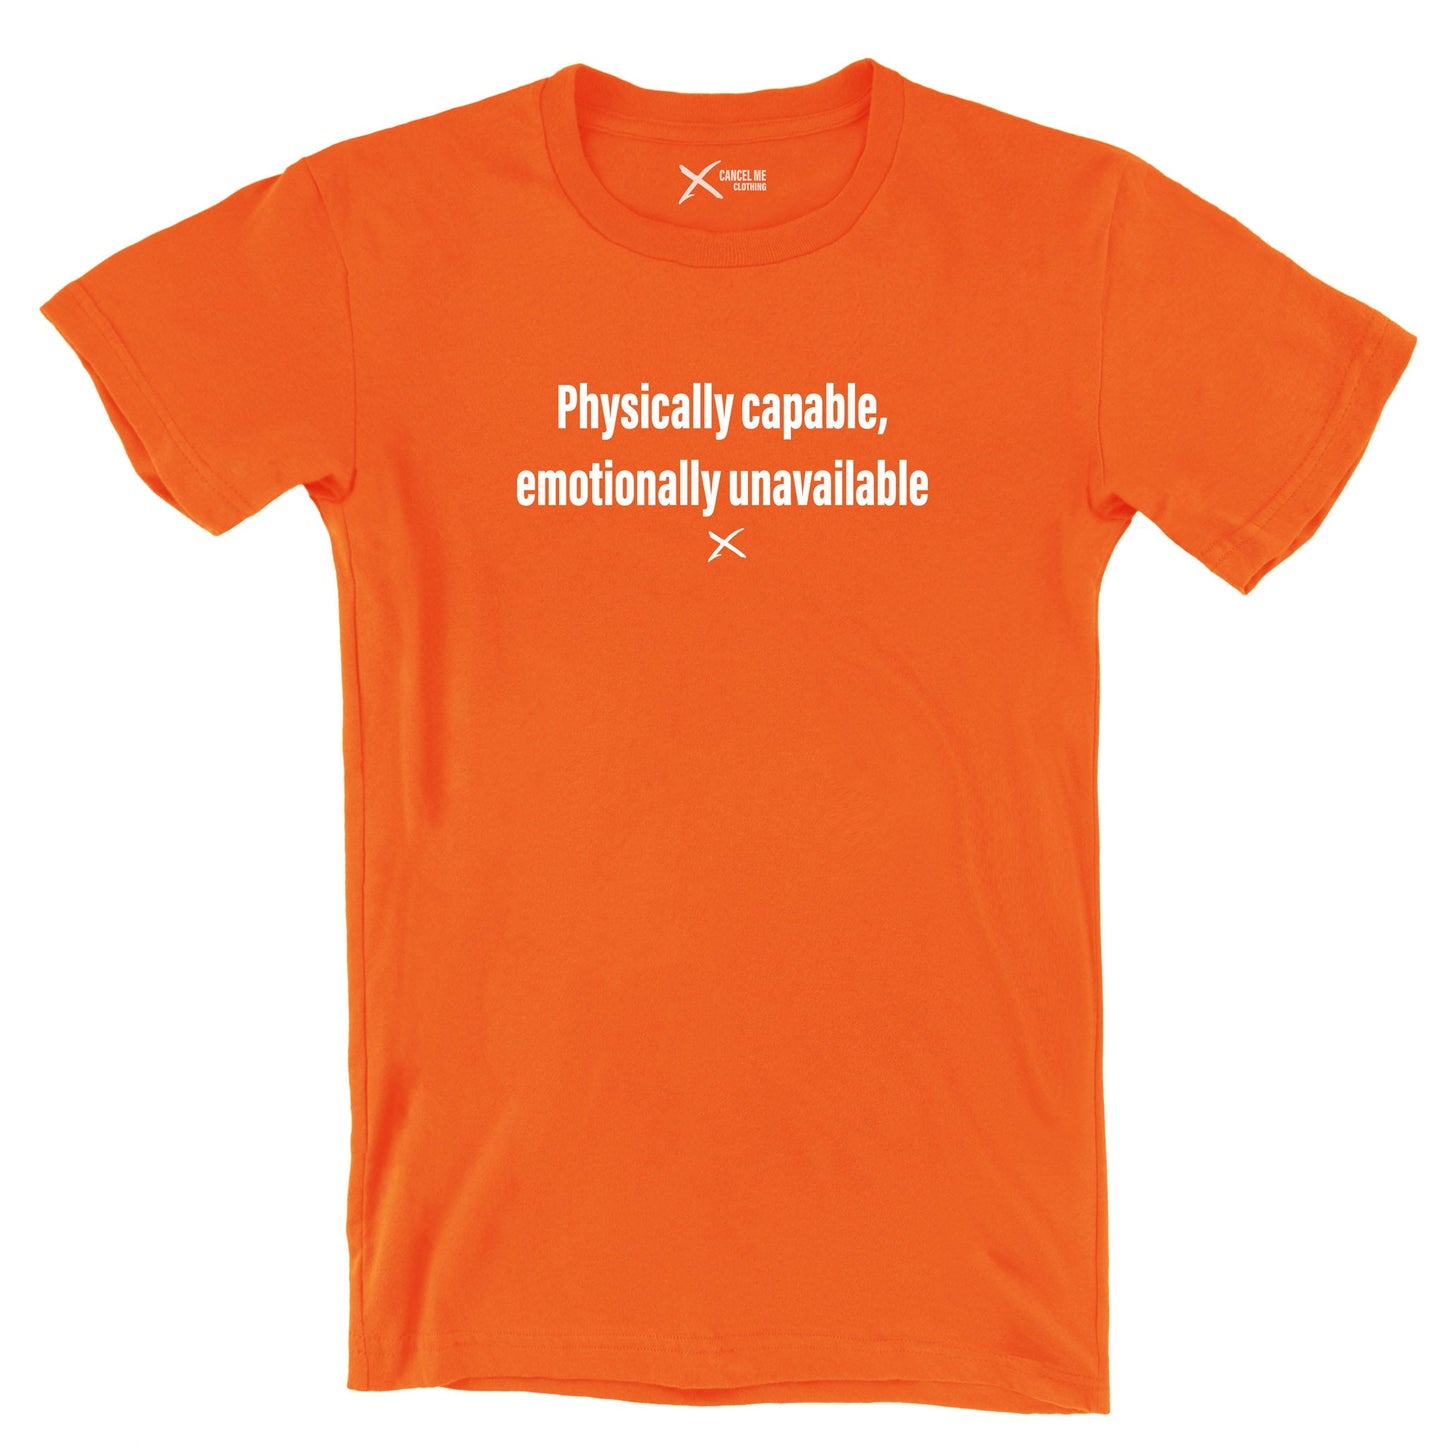 Physically capable, emotionally unavailable - Shirt